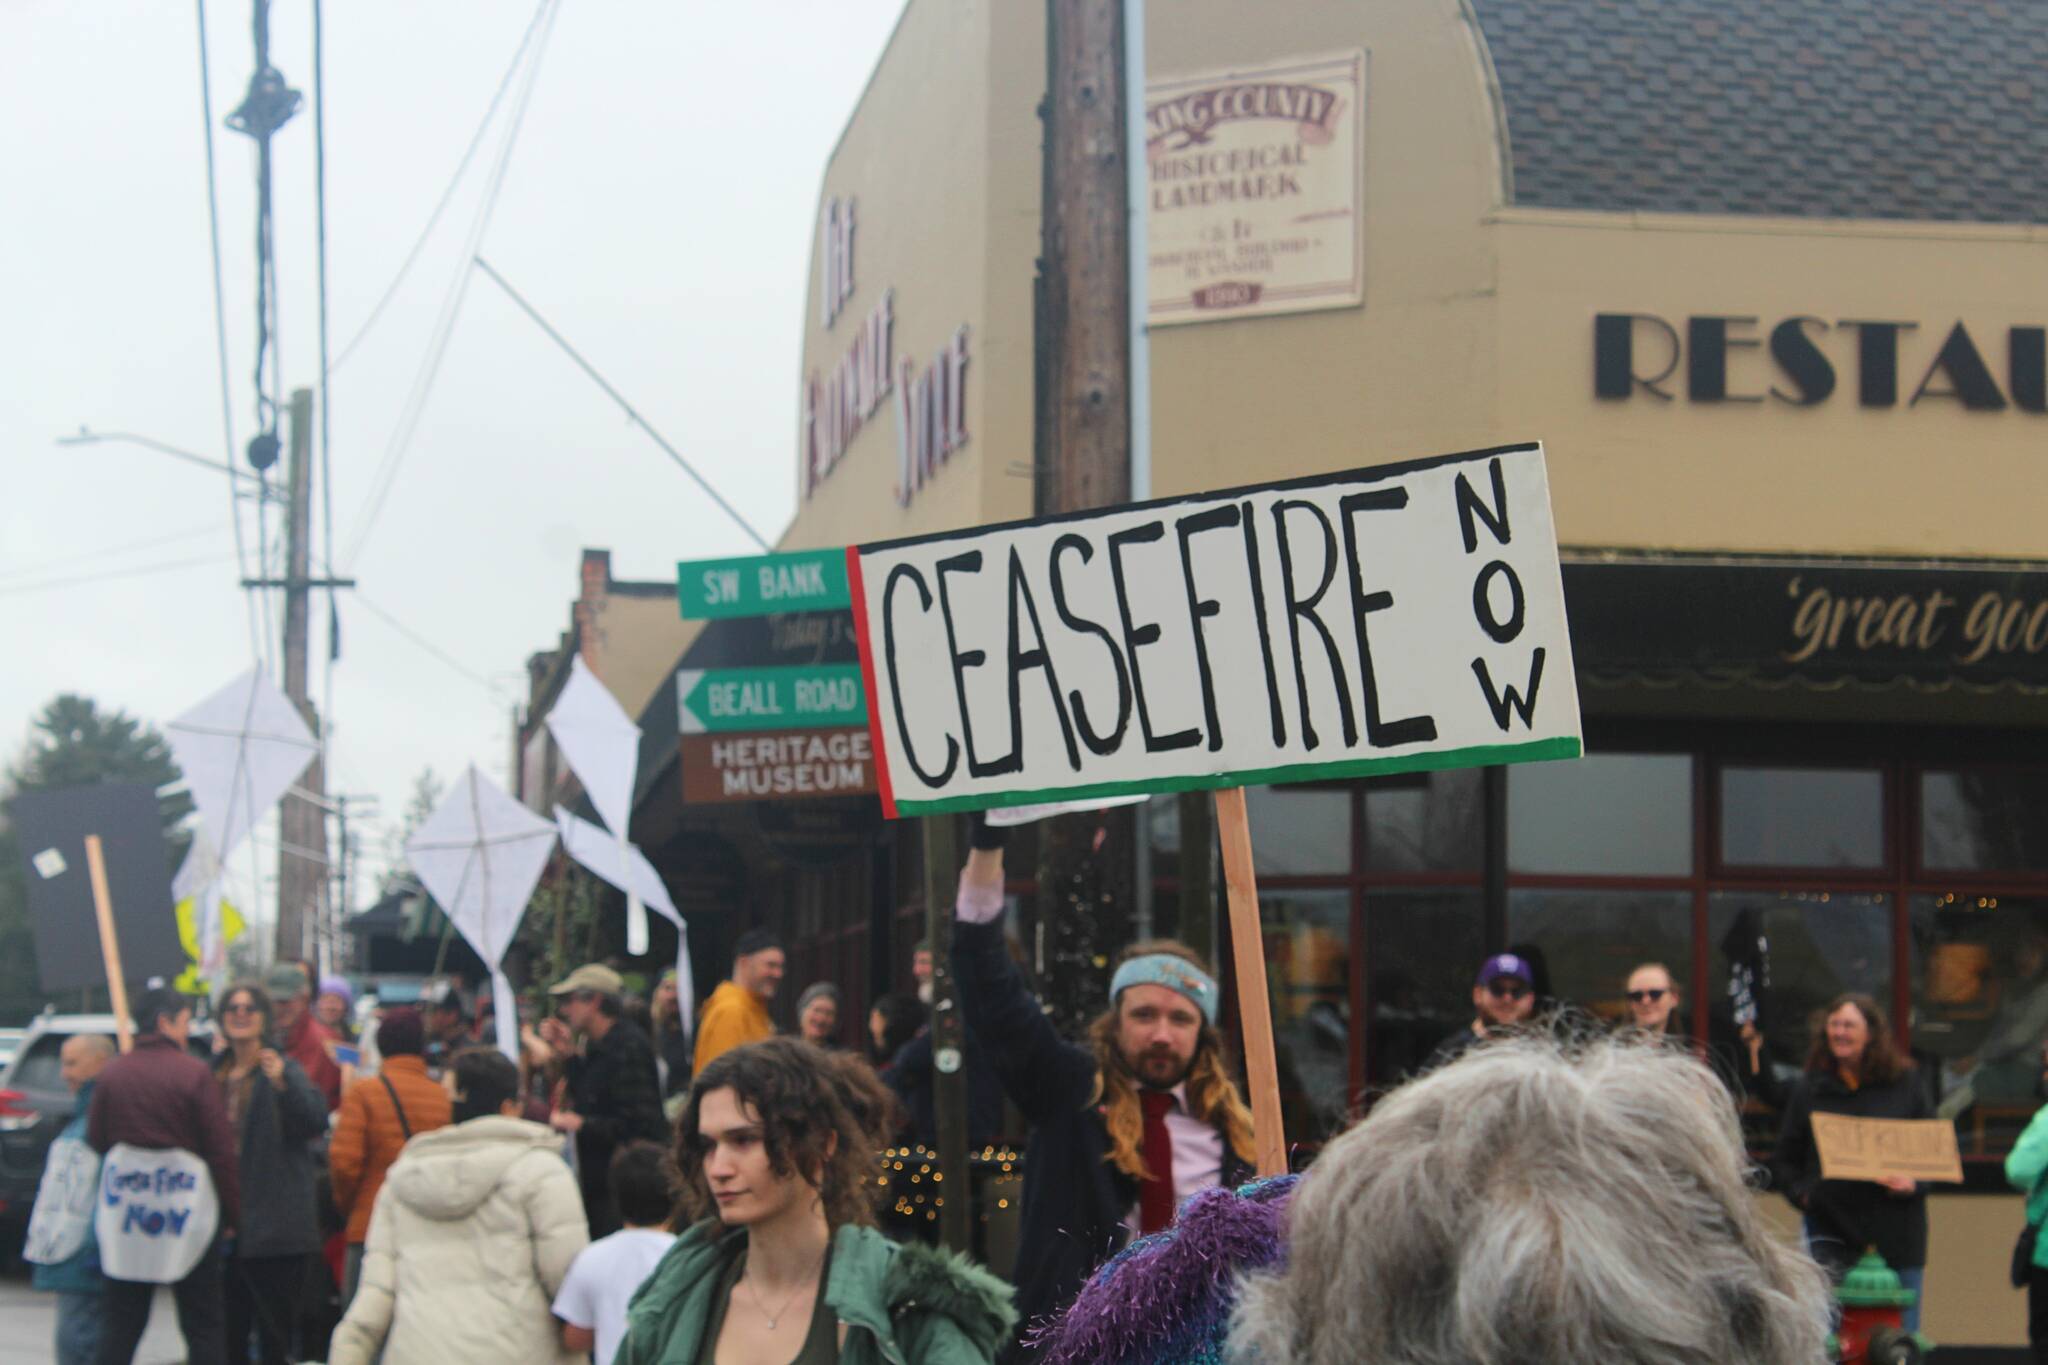 Around one hundred demonstrators took to the town core Sunday afternoon on Vashon Island to call for a ceasefire in Gaza.